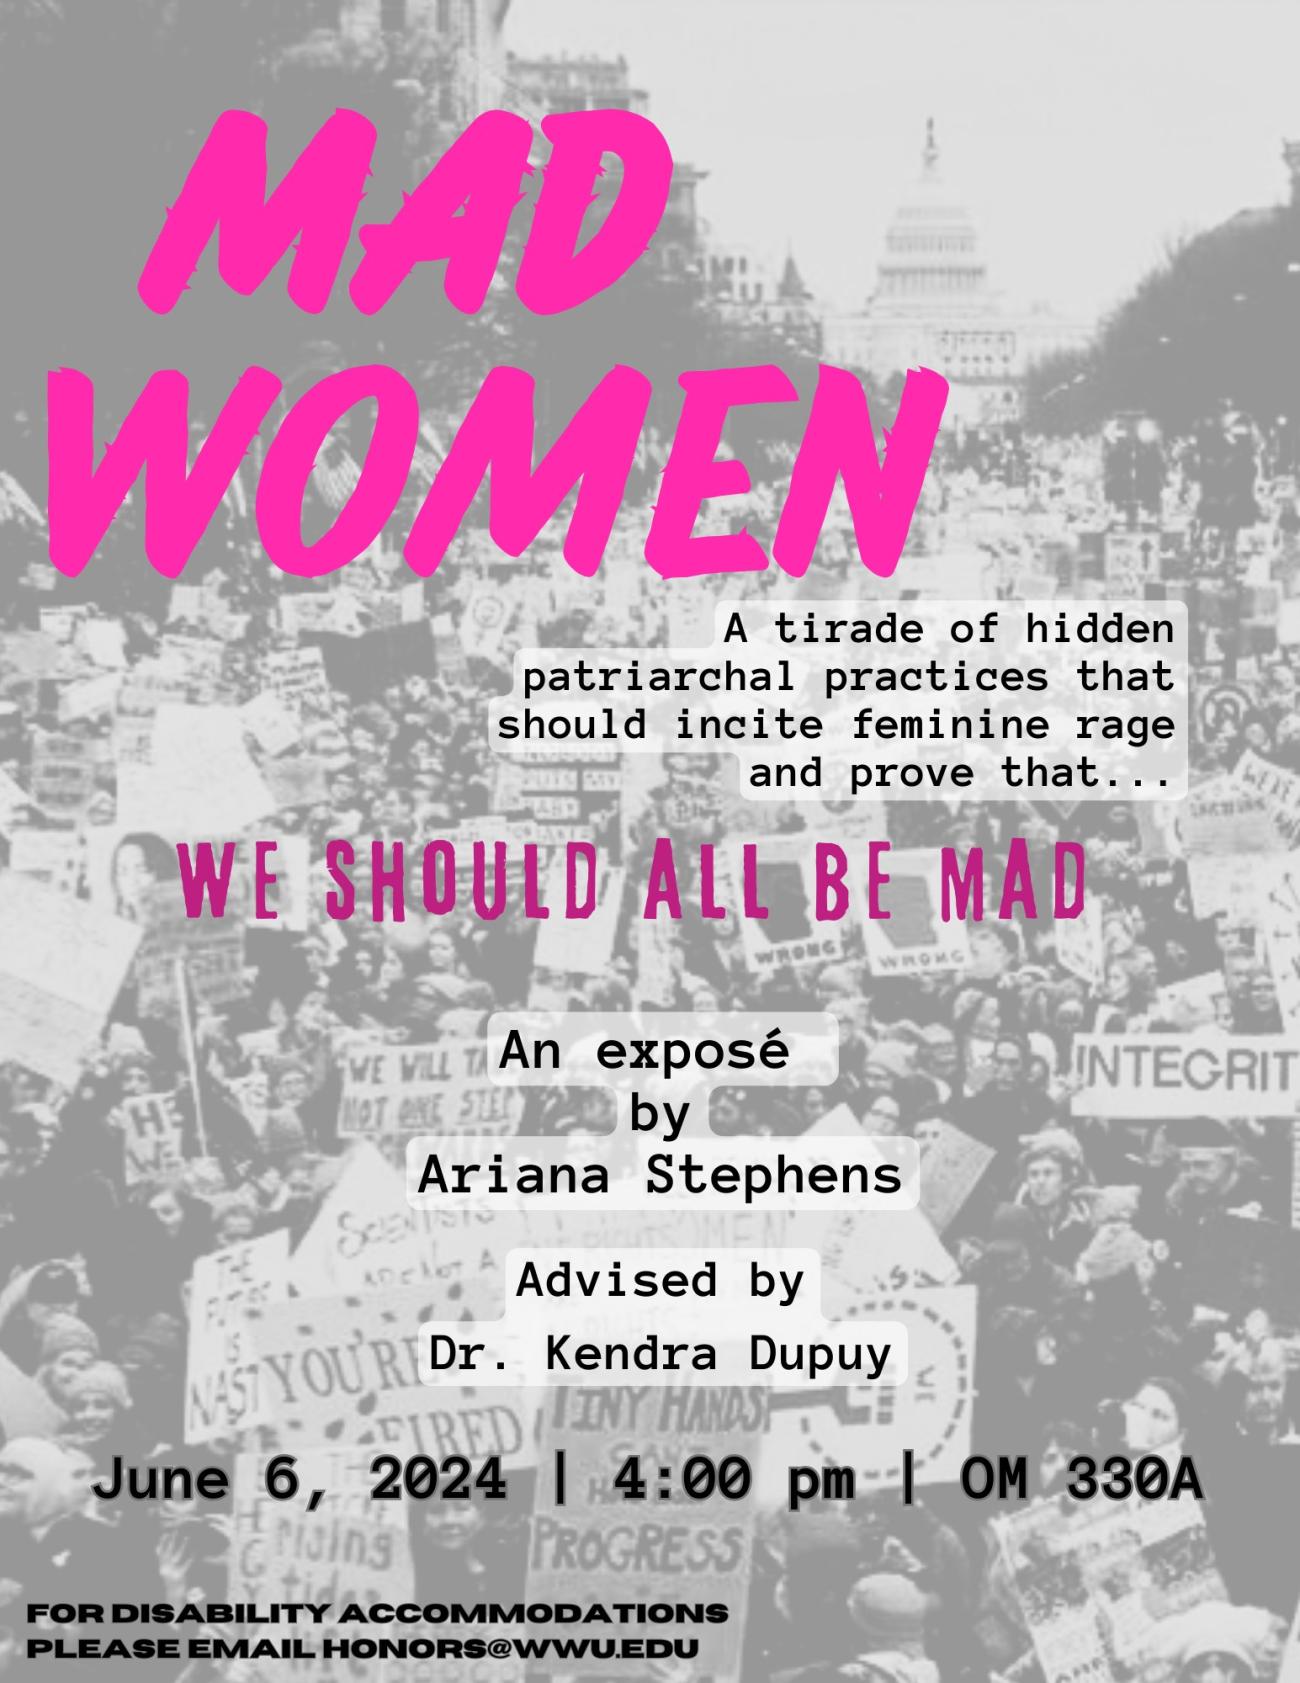 Monochrome background depicting a women’s rights march at the Capitol in Washington D.C. Text reads “Mad Women. A tirade of hidden patriarchal practices that should incite feminine rage and prove that we should all be mad. An exposé by Ariana Stephens, advised by Dr. Kendra Dupuy. June 6, 2024, 4:00 pm, OM 330A. For disability accommodations please email honors@wwu.edu”.